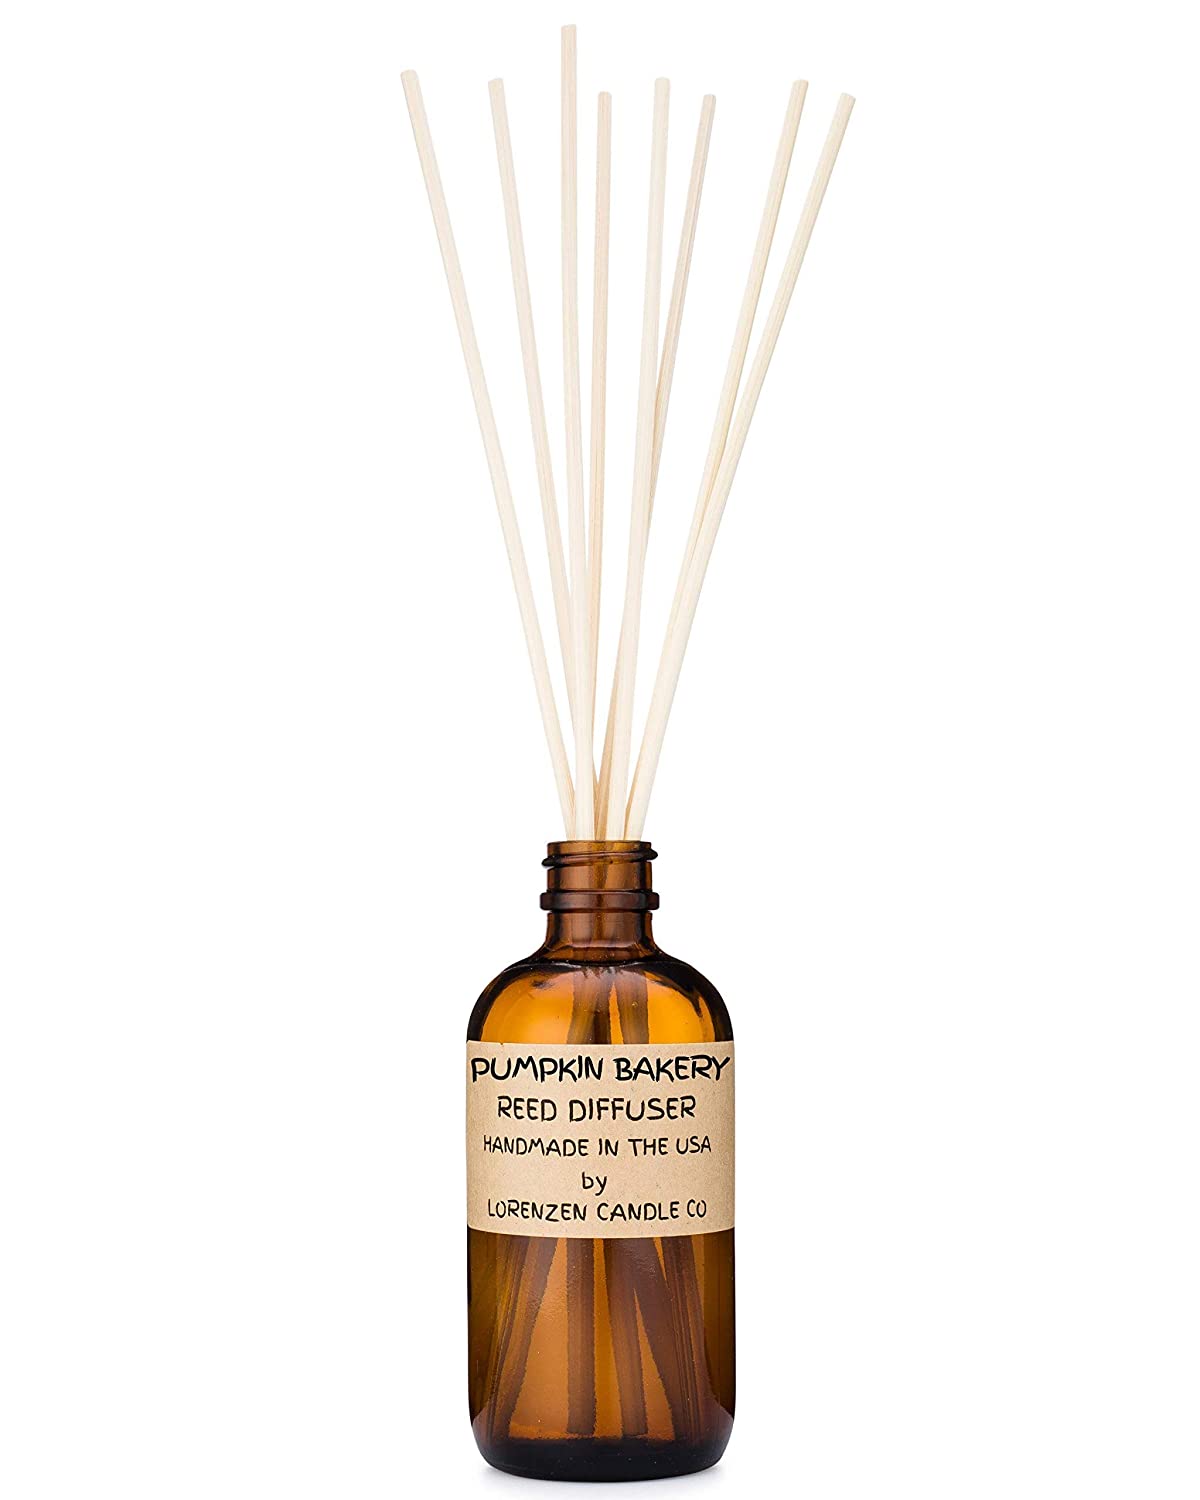 Pumpkin Bakery Reed Diffuser Set 3oz | Handmade in the USA by Lorenzen Candle Co